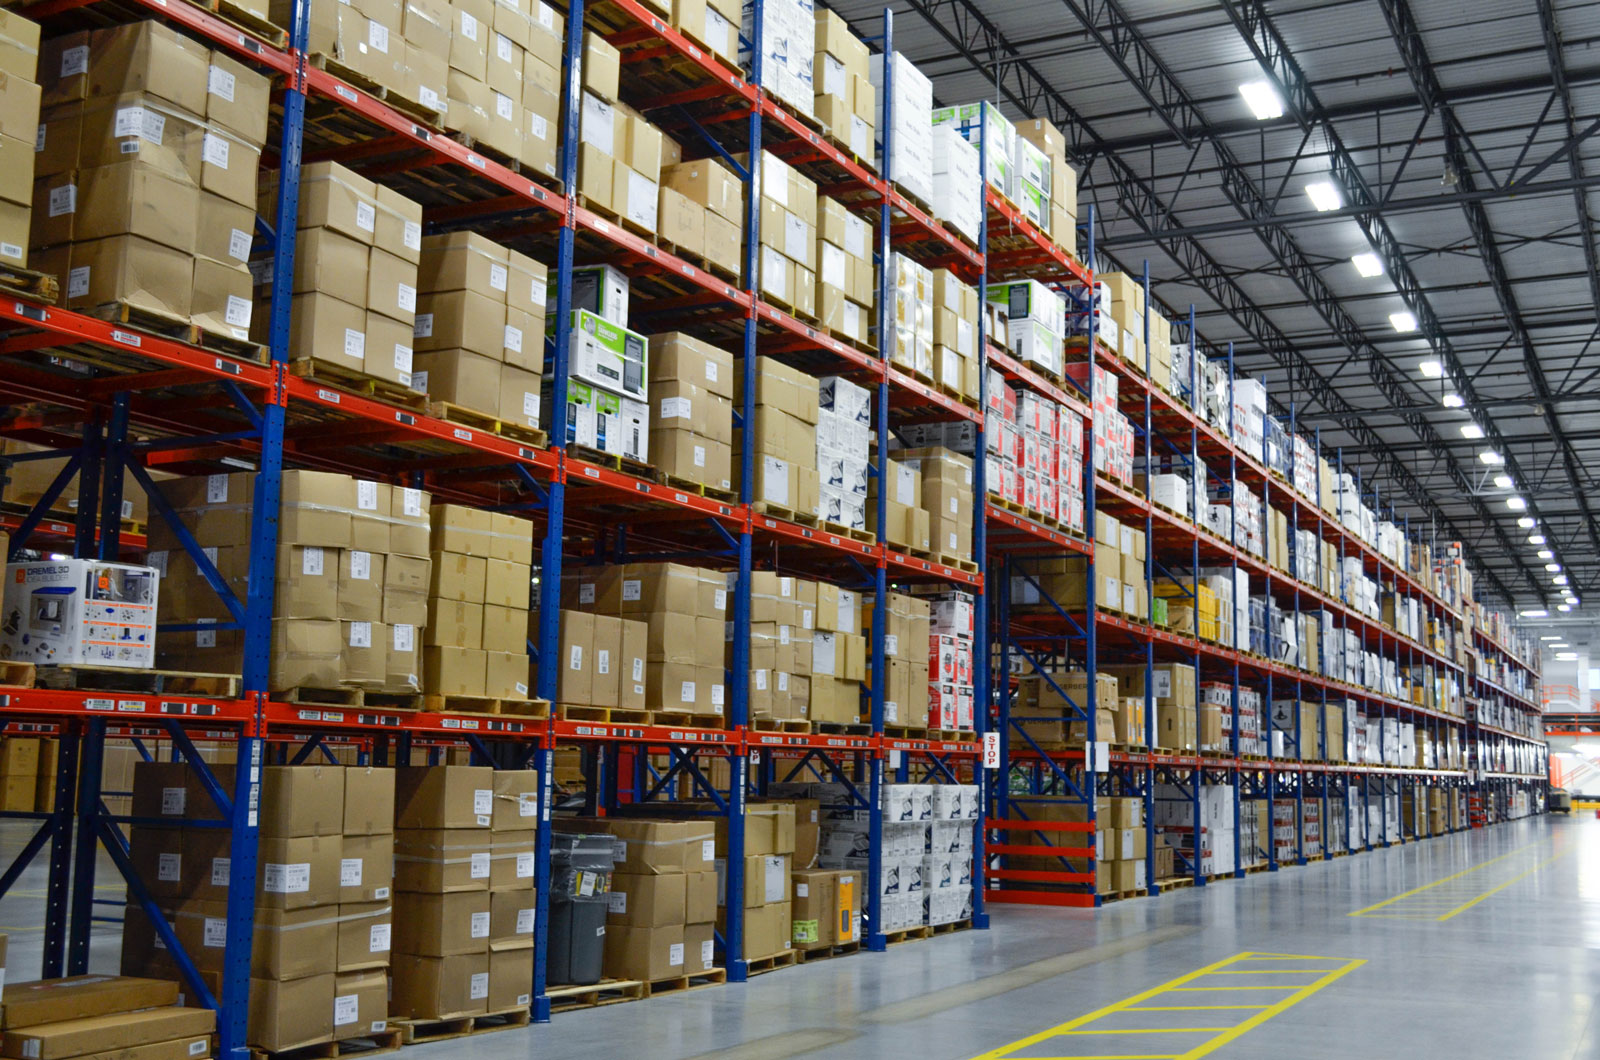 Frazier's Sentinel Selective Pallet Racking stores various retail stock keeping units (SKU's).